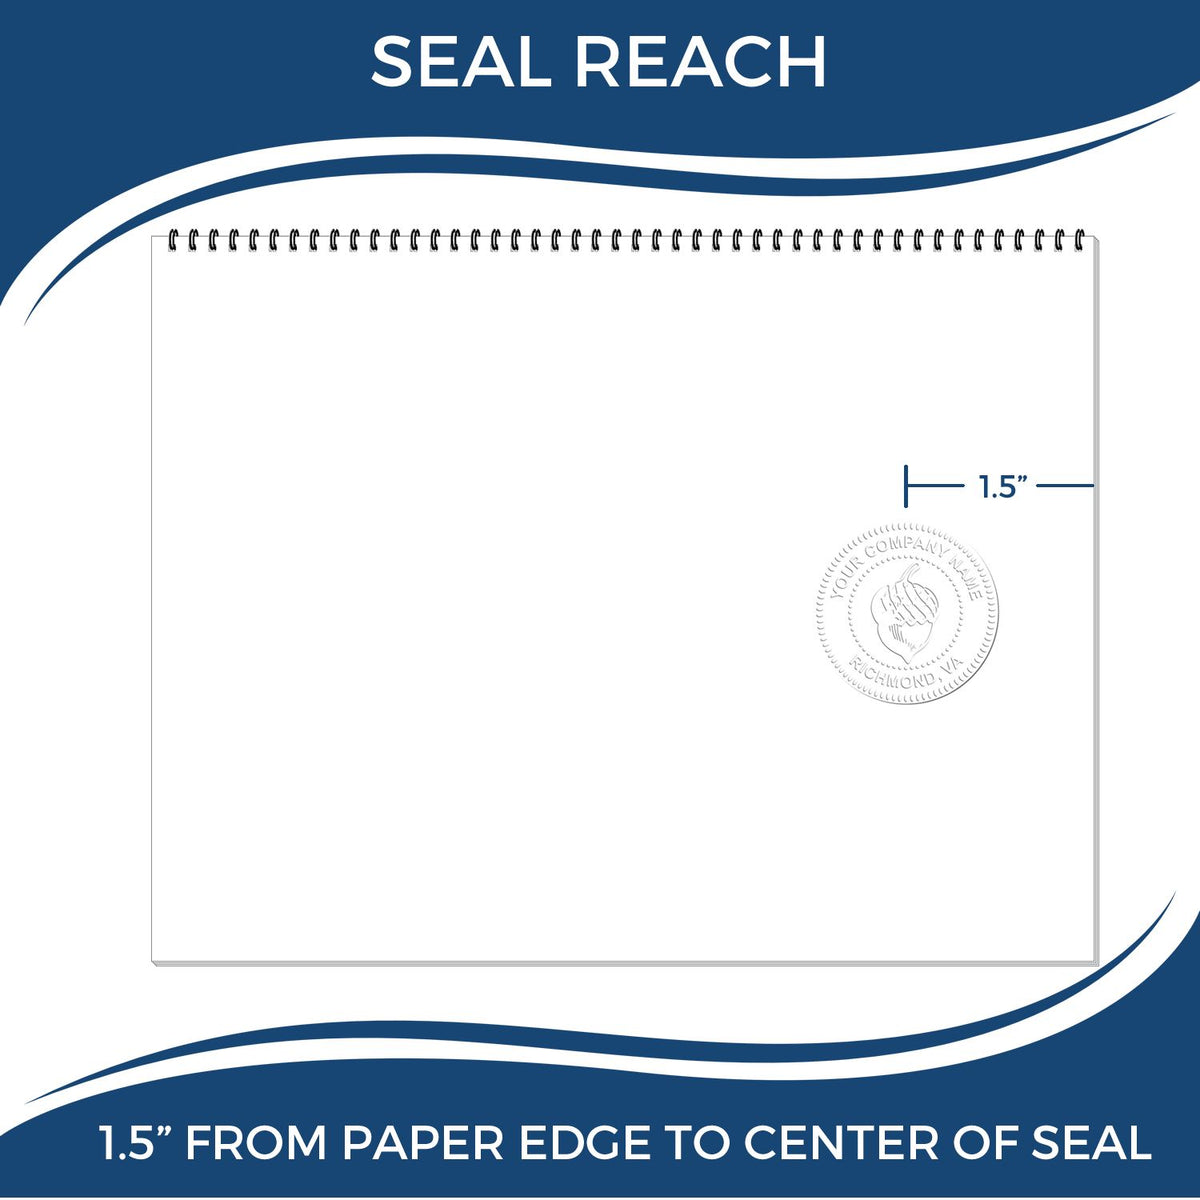 An infographic showing the seal reach which is represented by a ruler and a miniature seal image of the Gift New Mexico Geologist Seal